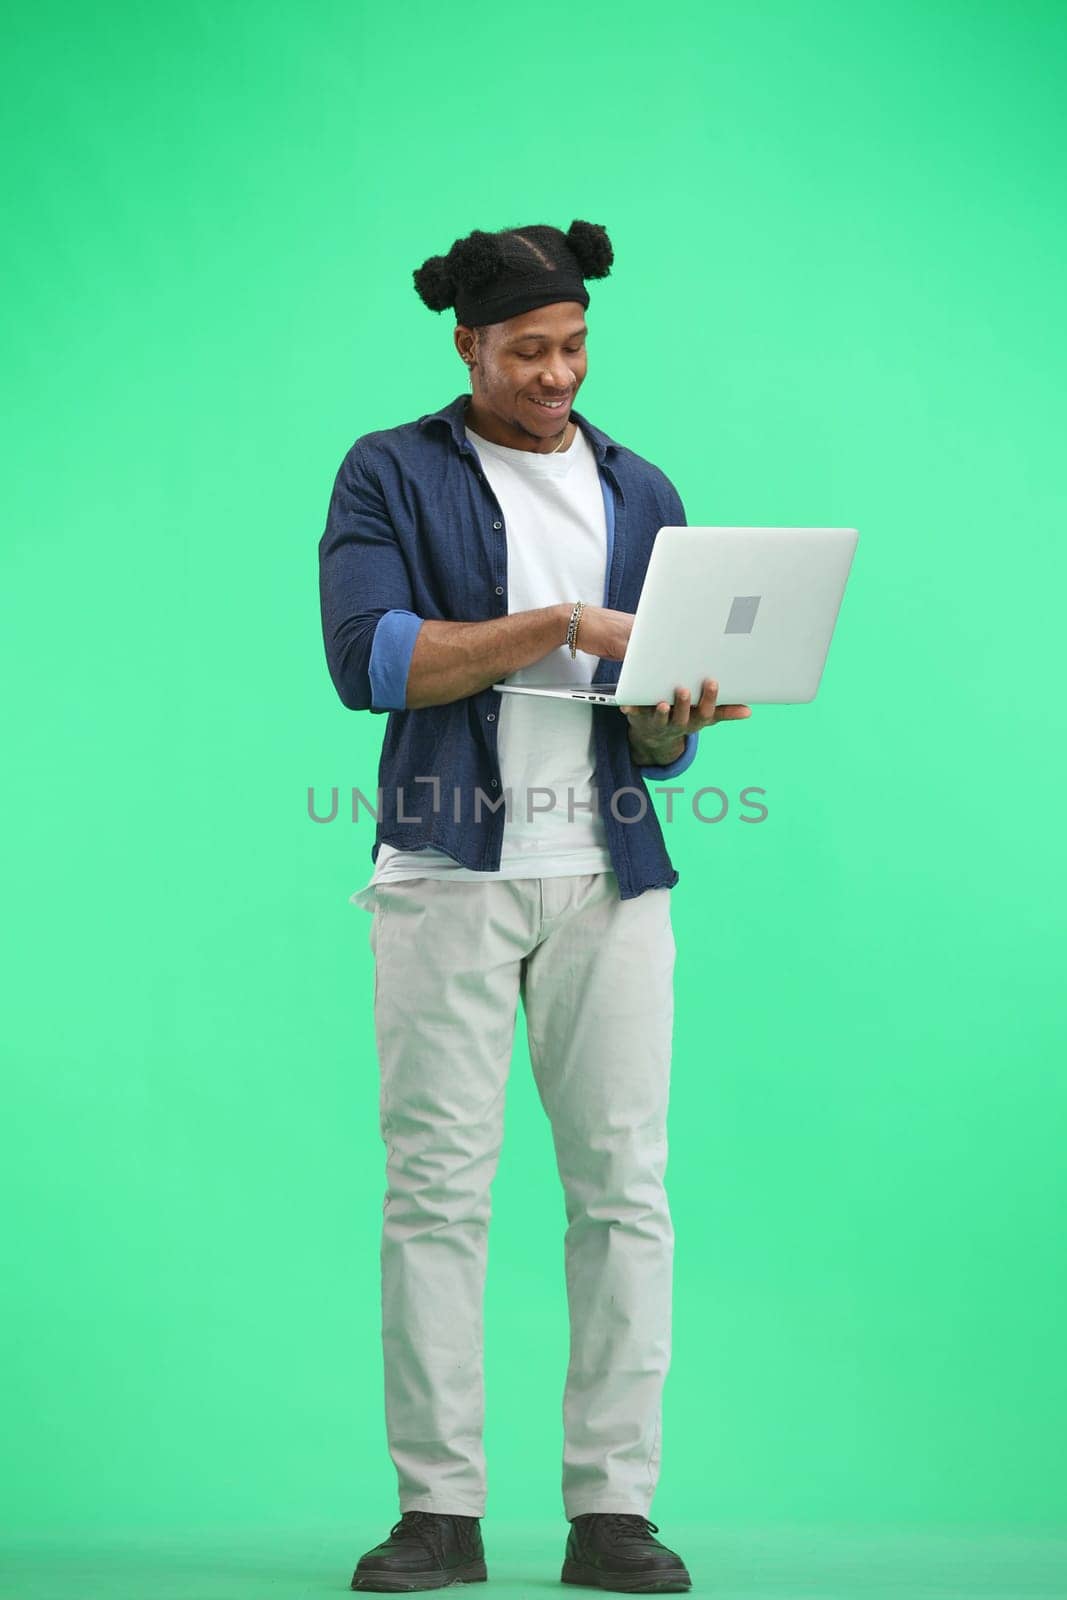 A man, full-length, on a green background, uses a laptop by Prosto